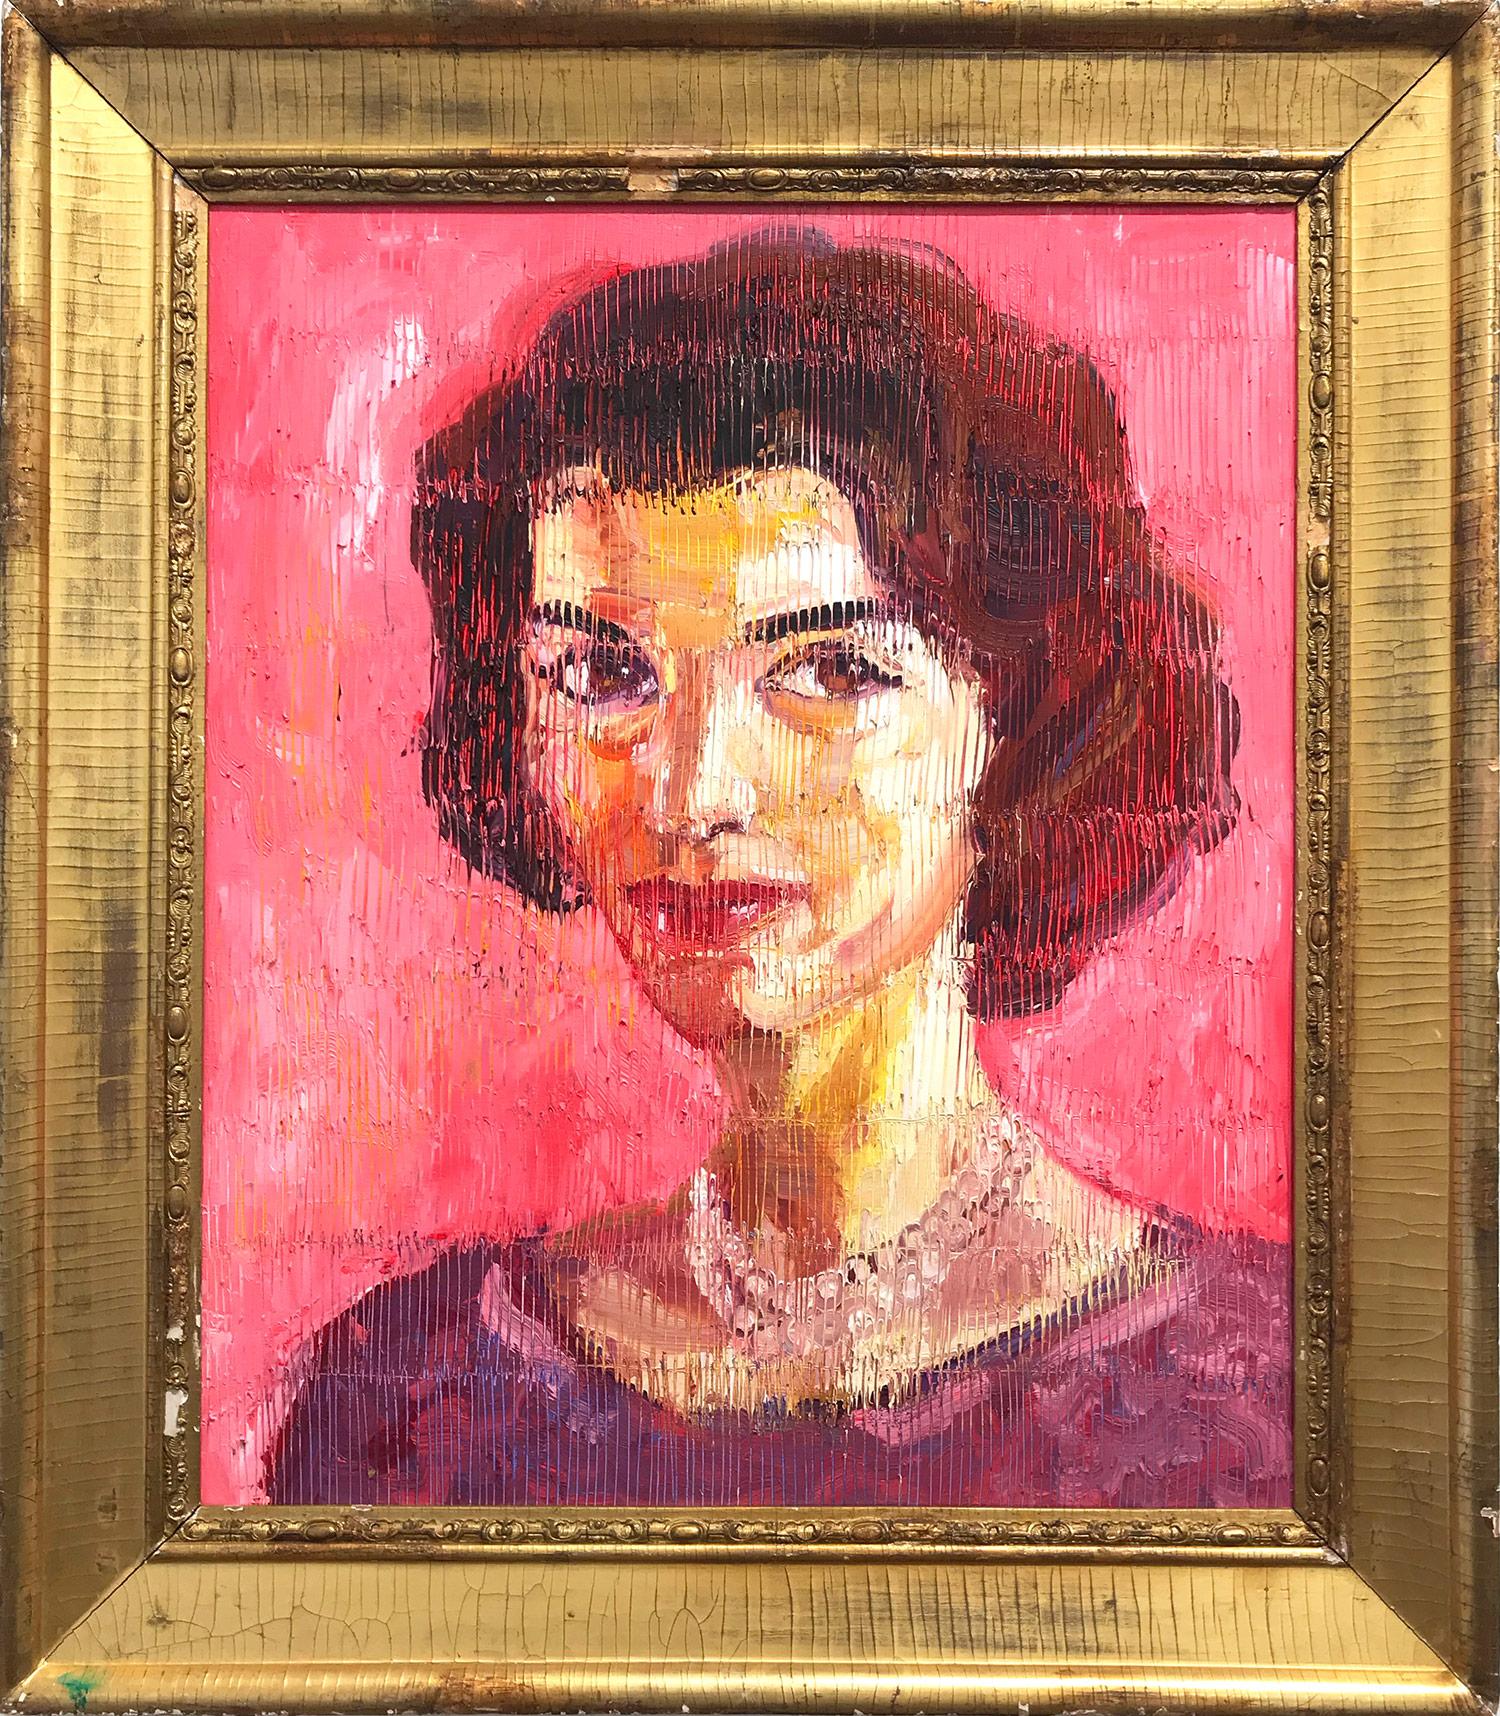 Hunt Slonem Figurative Painting - "Jackie Kennedy" Neo-Expressionist Oil Painting in Pink Background on Wood Panel